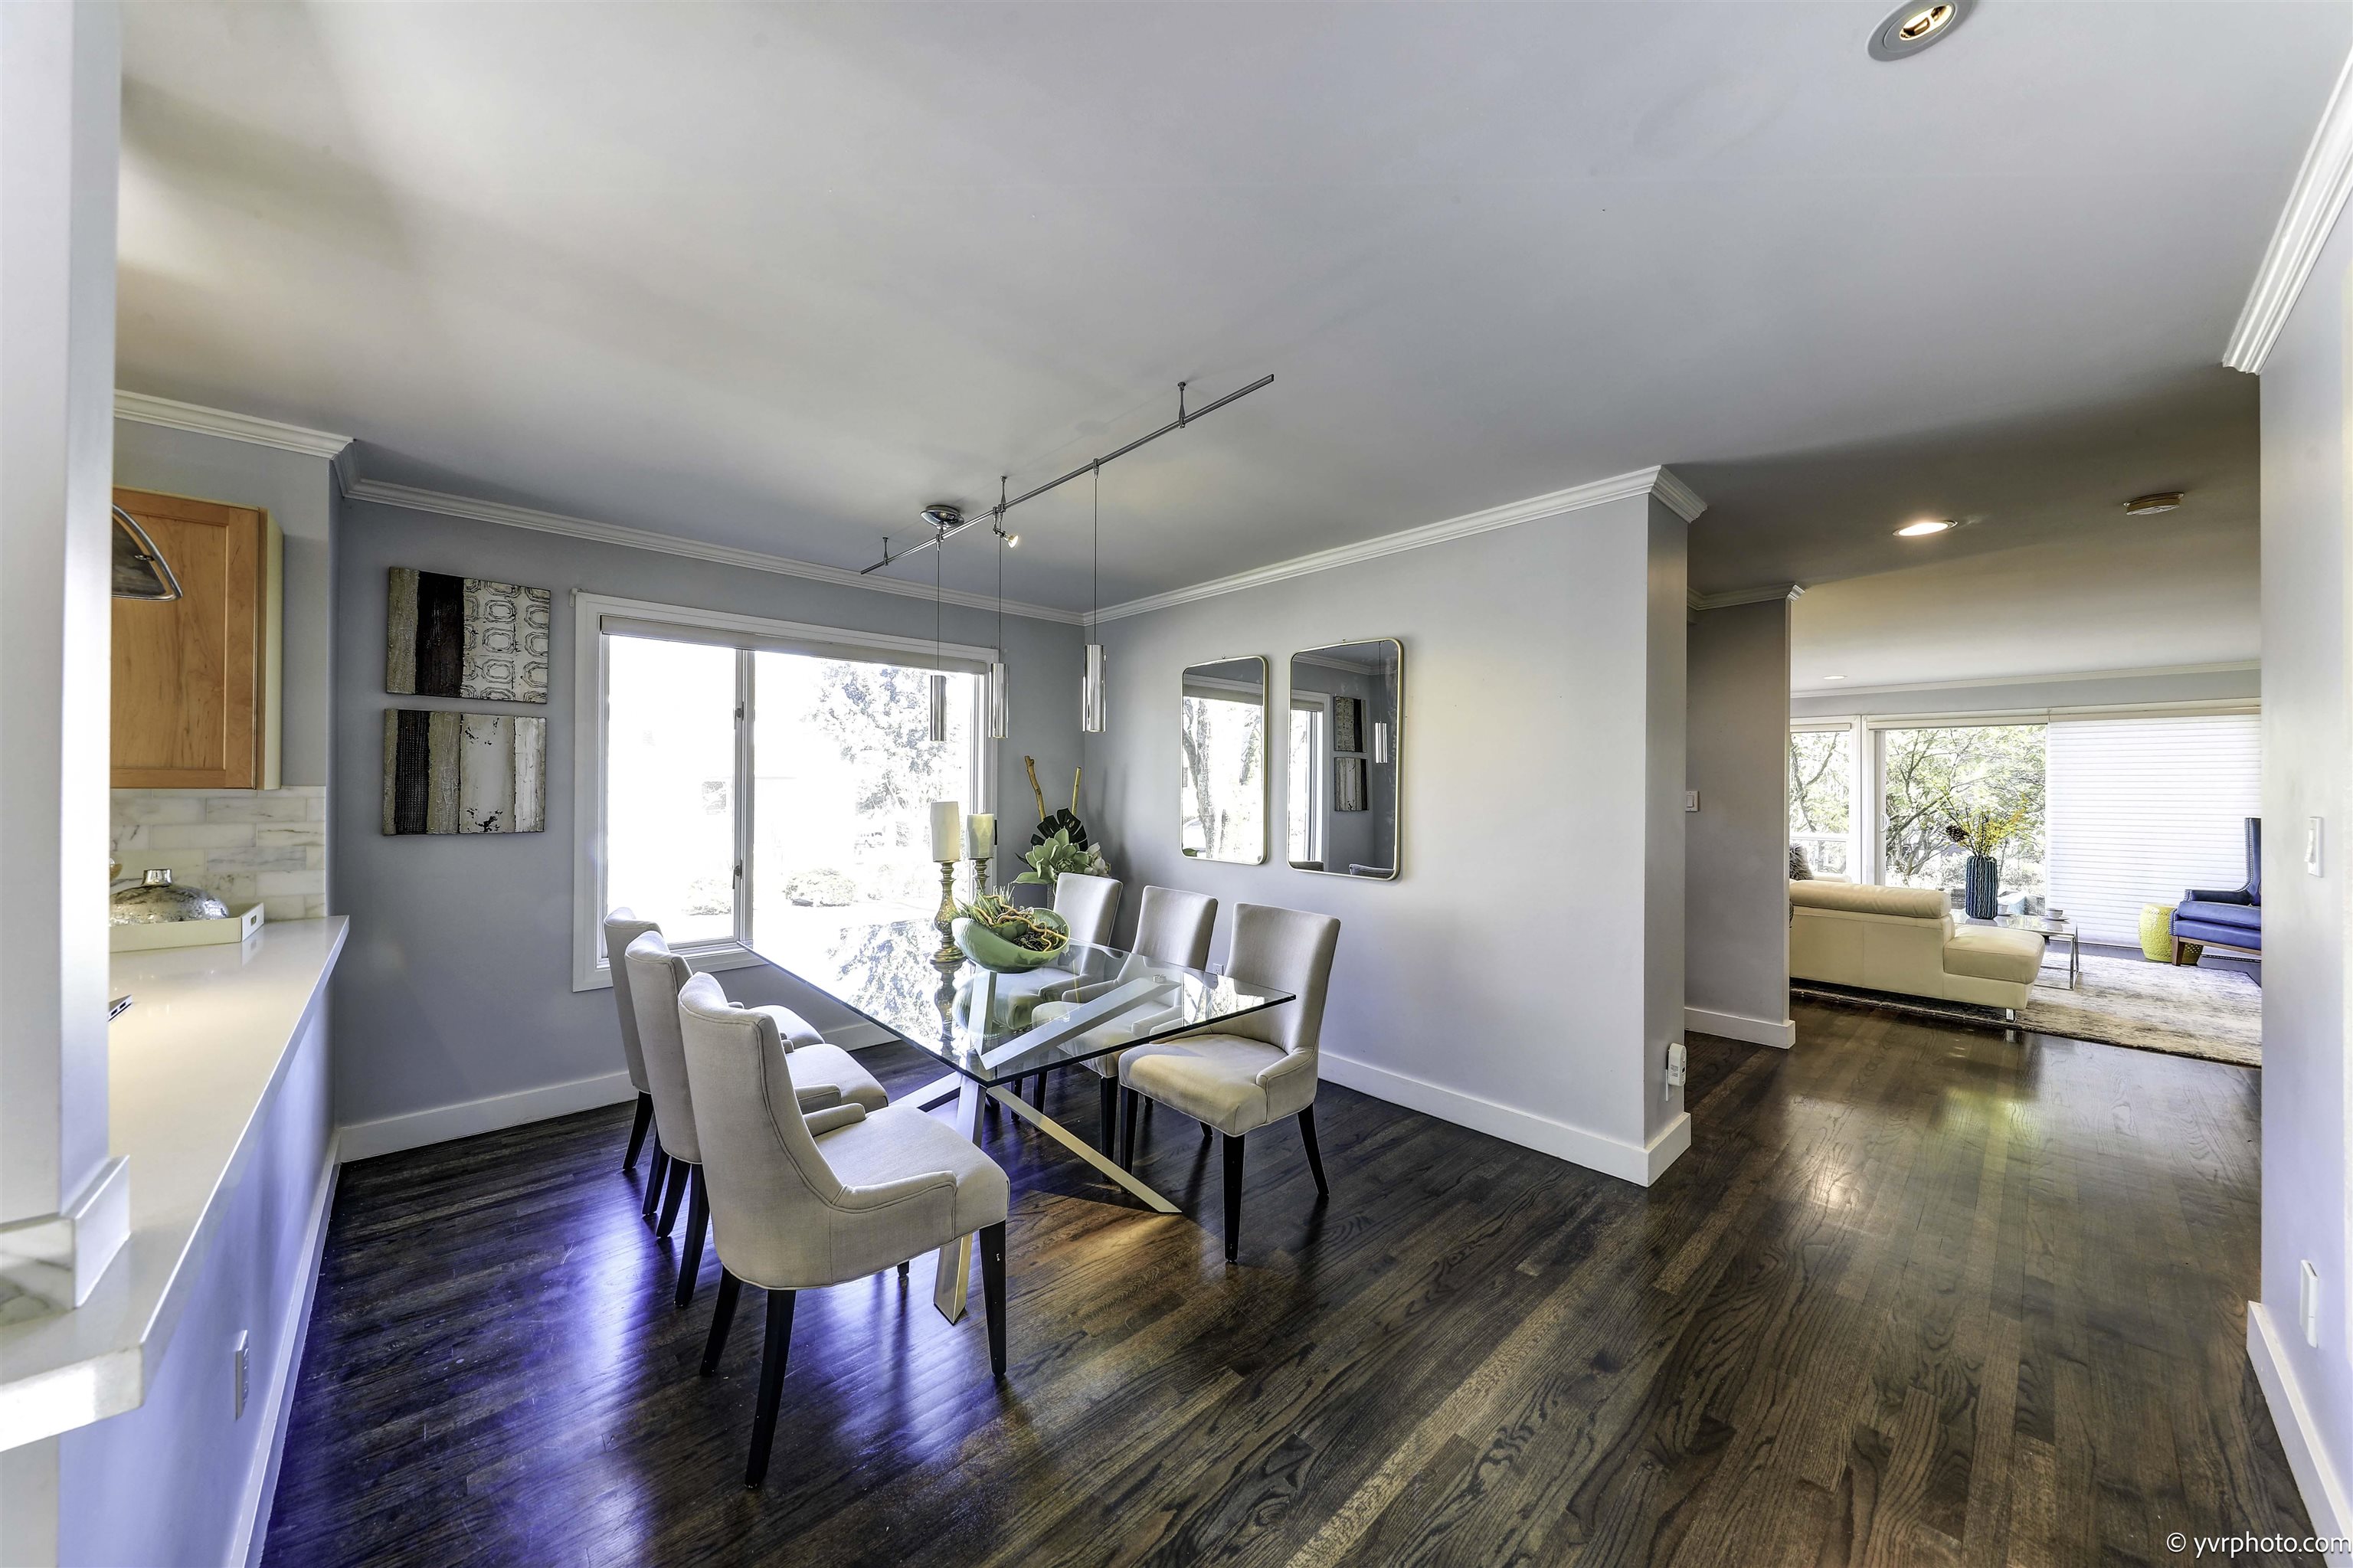 Listing image of 3318 W 22ND AVENUE